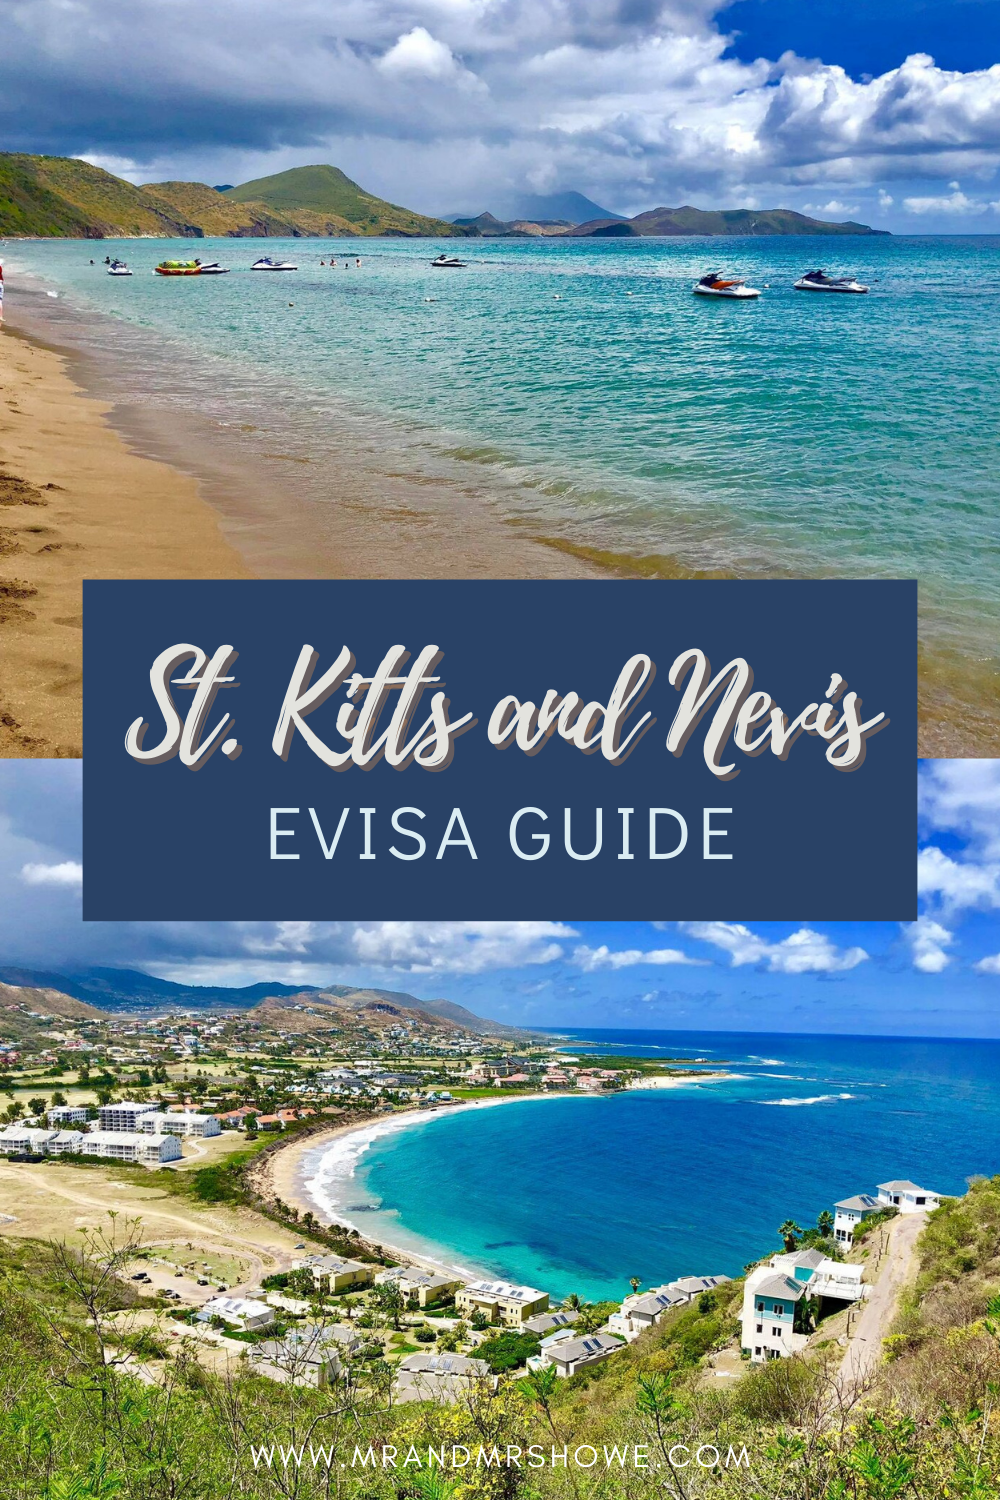 How To Get St. Kitts and Nevis EVisa With Your Philippines Passport [Tourist Visa Guide For Saint Kitts and Nevis].png